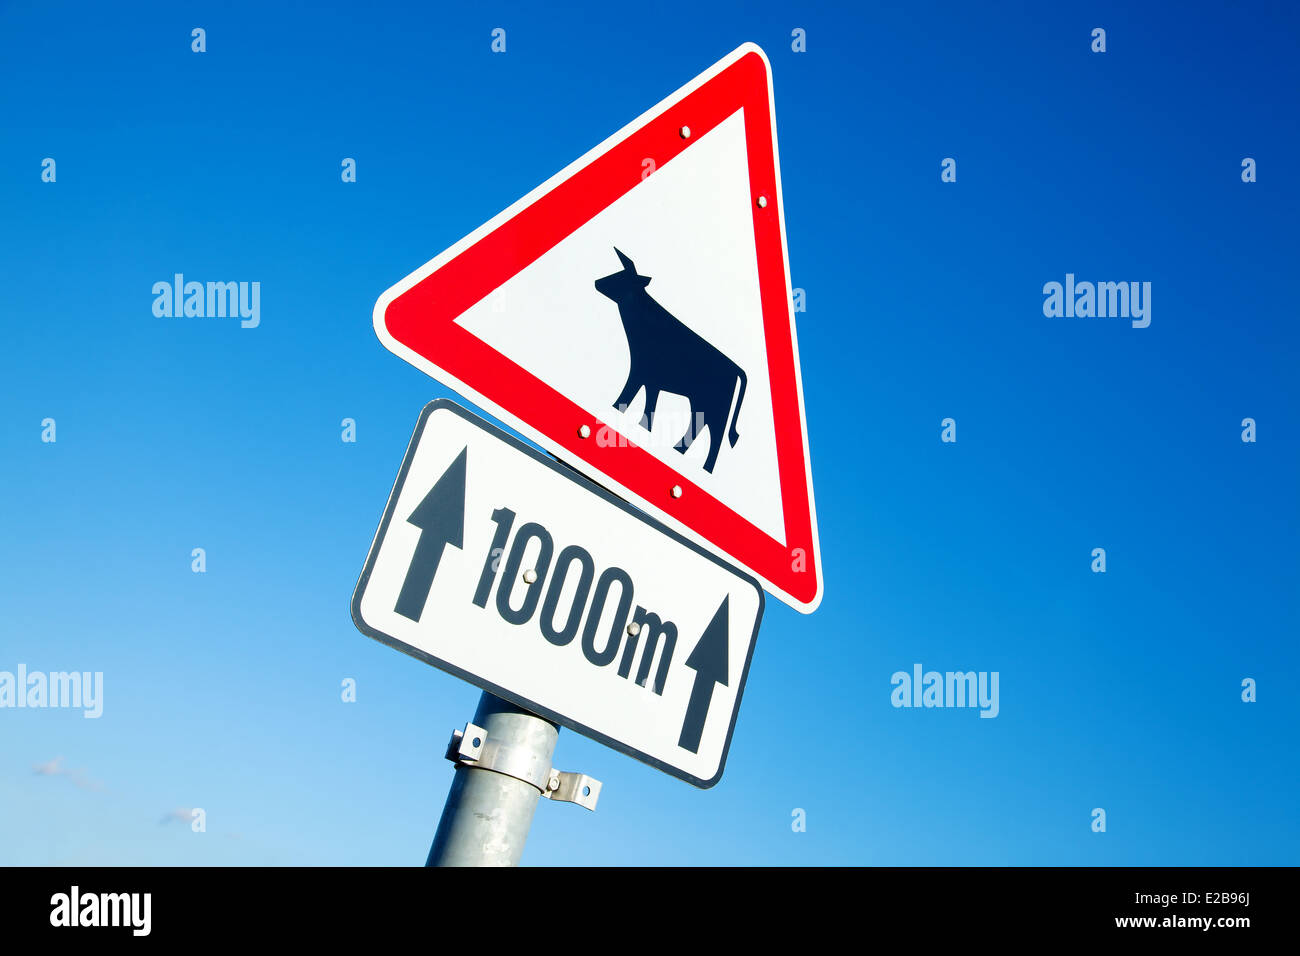 Cow sign Stock Photo